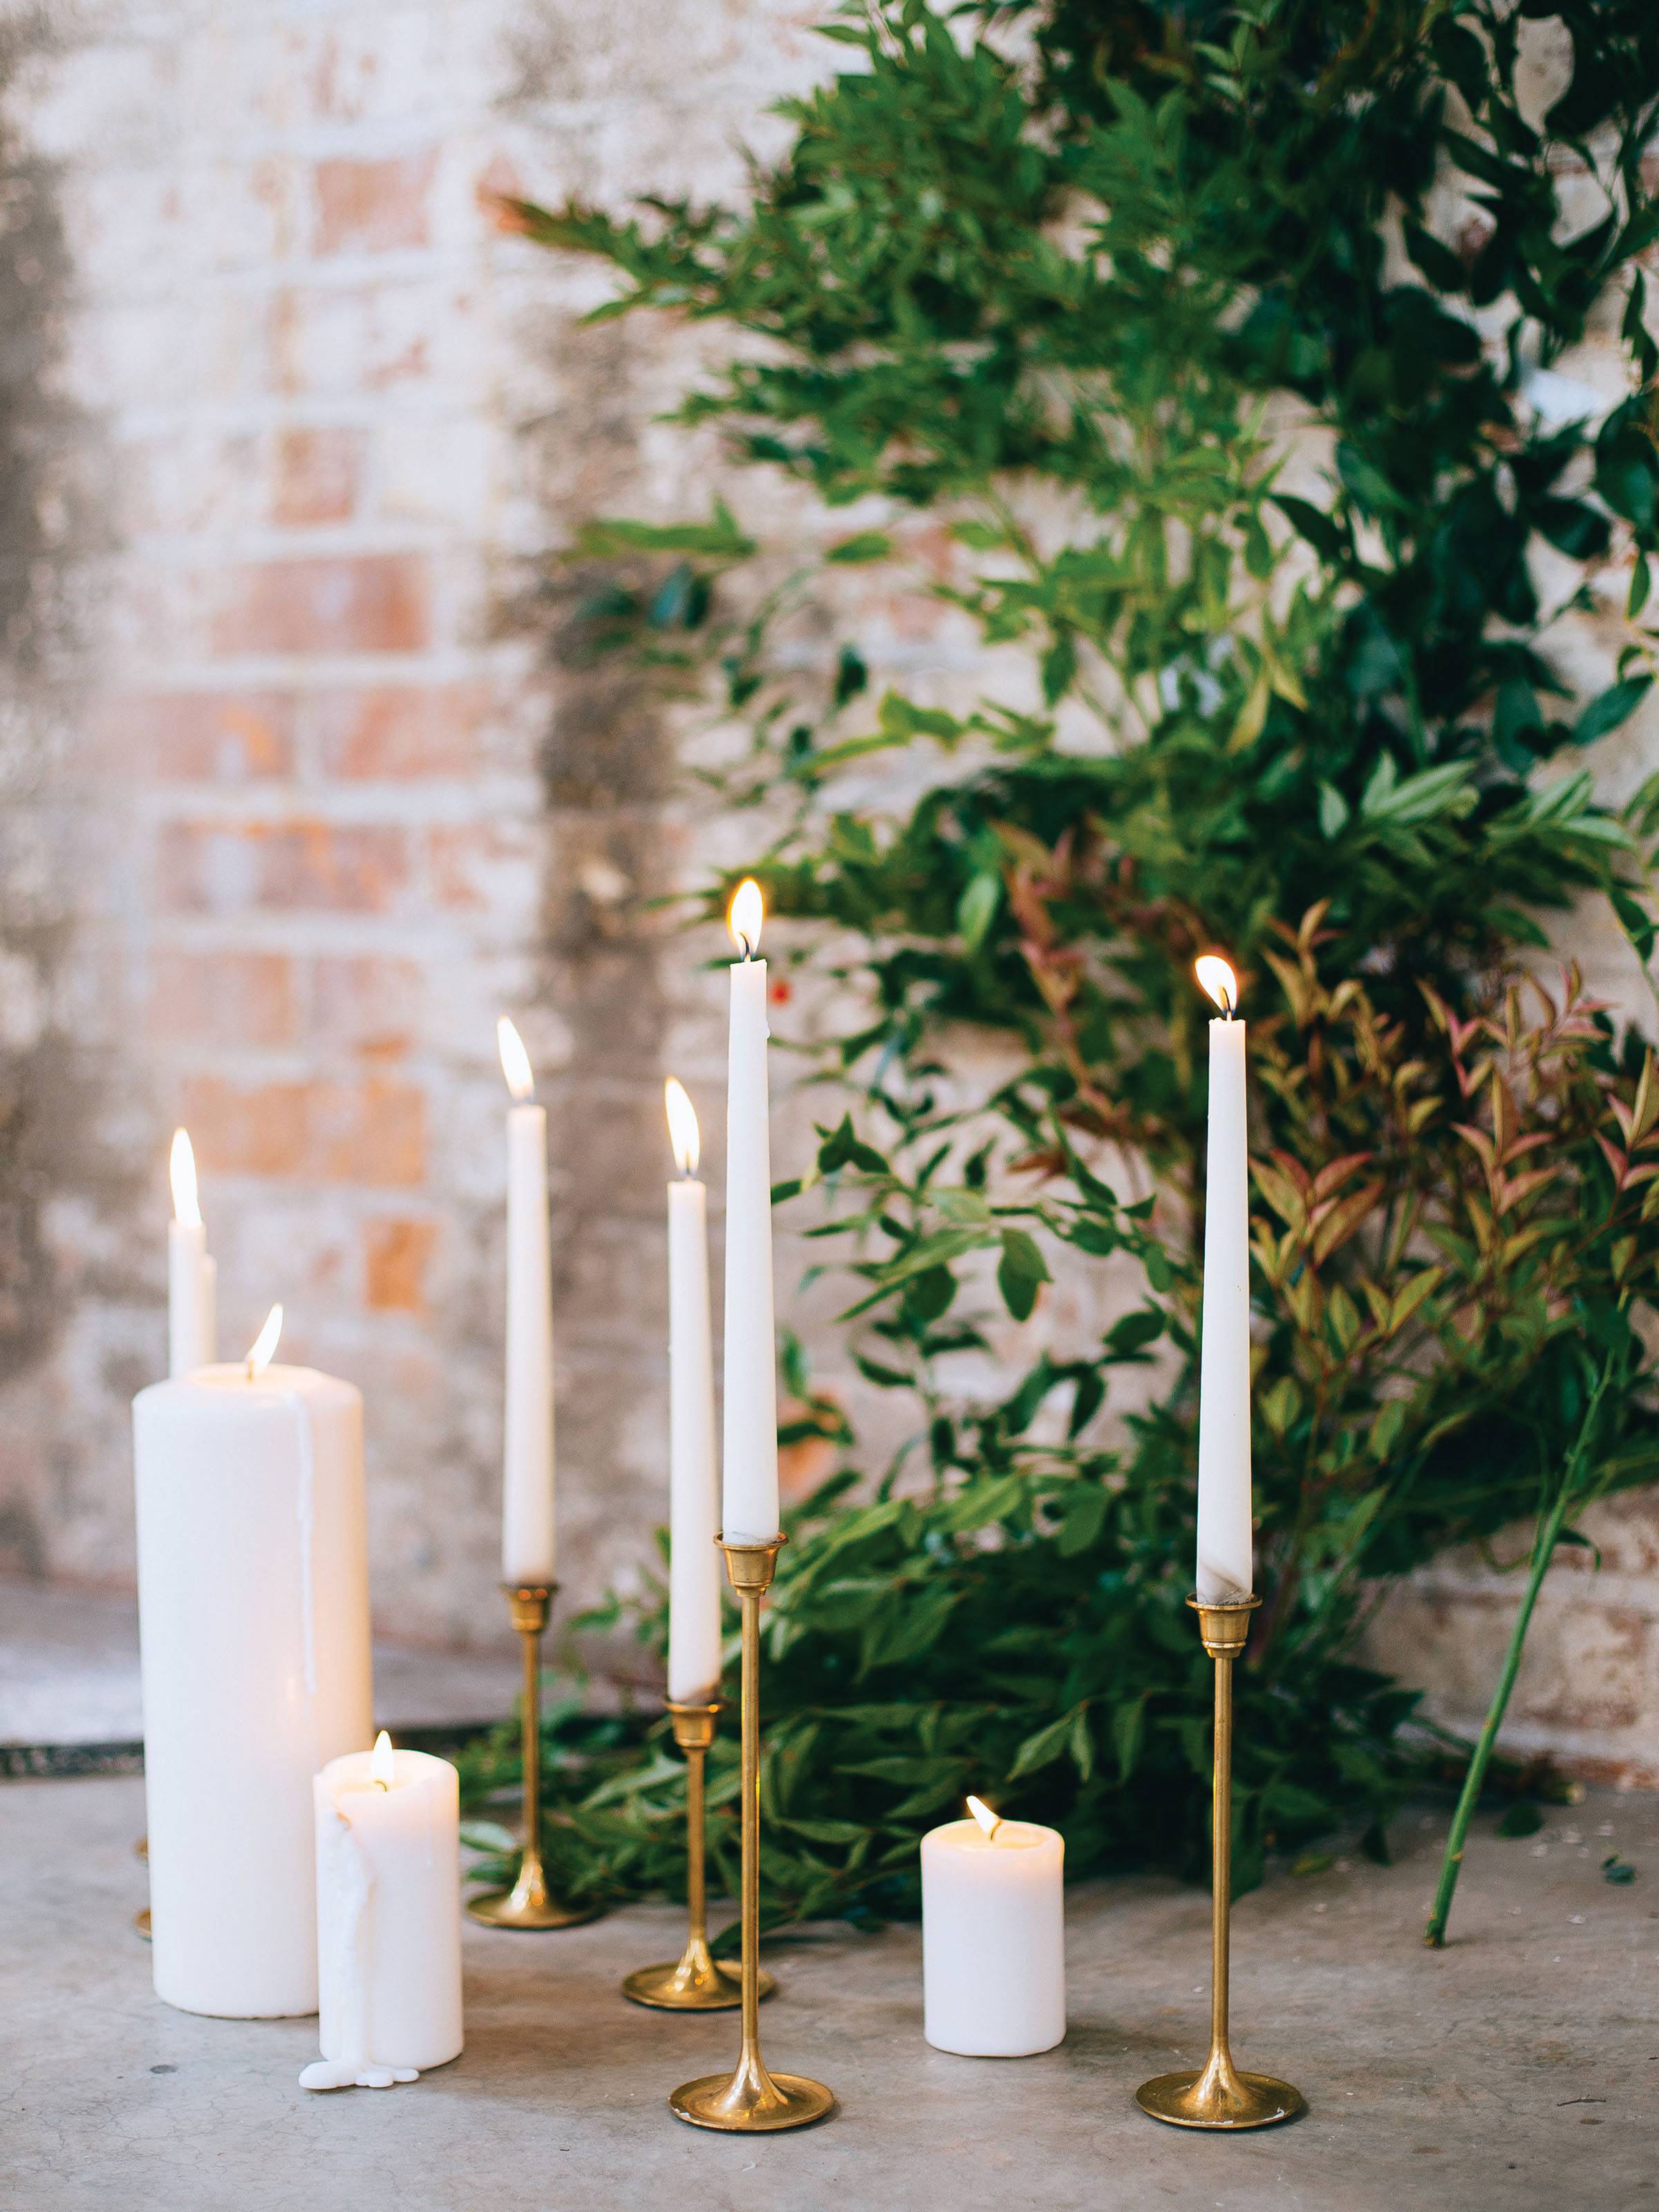 Altar decor of white pillar and tapered candles in gold holders with arch of greenery